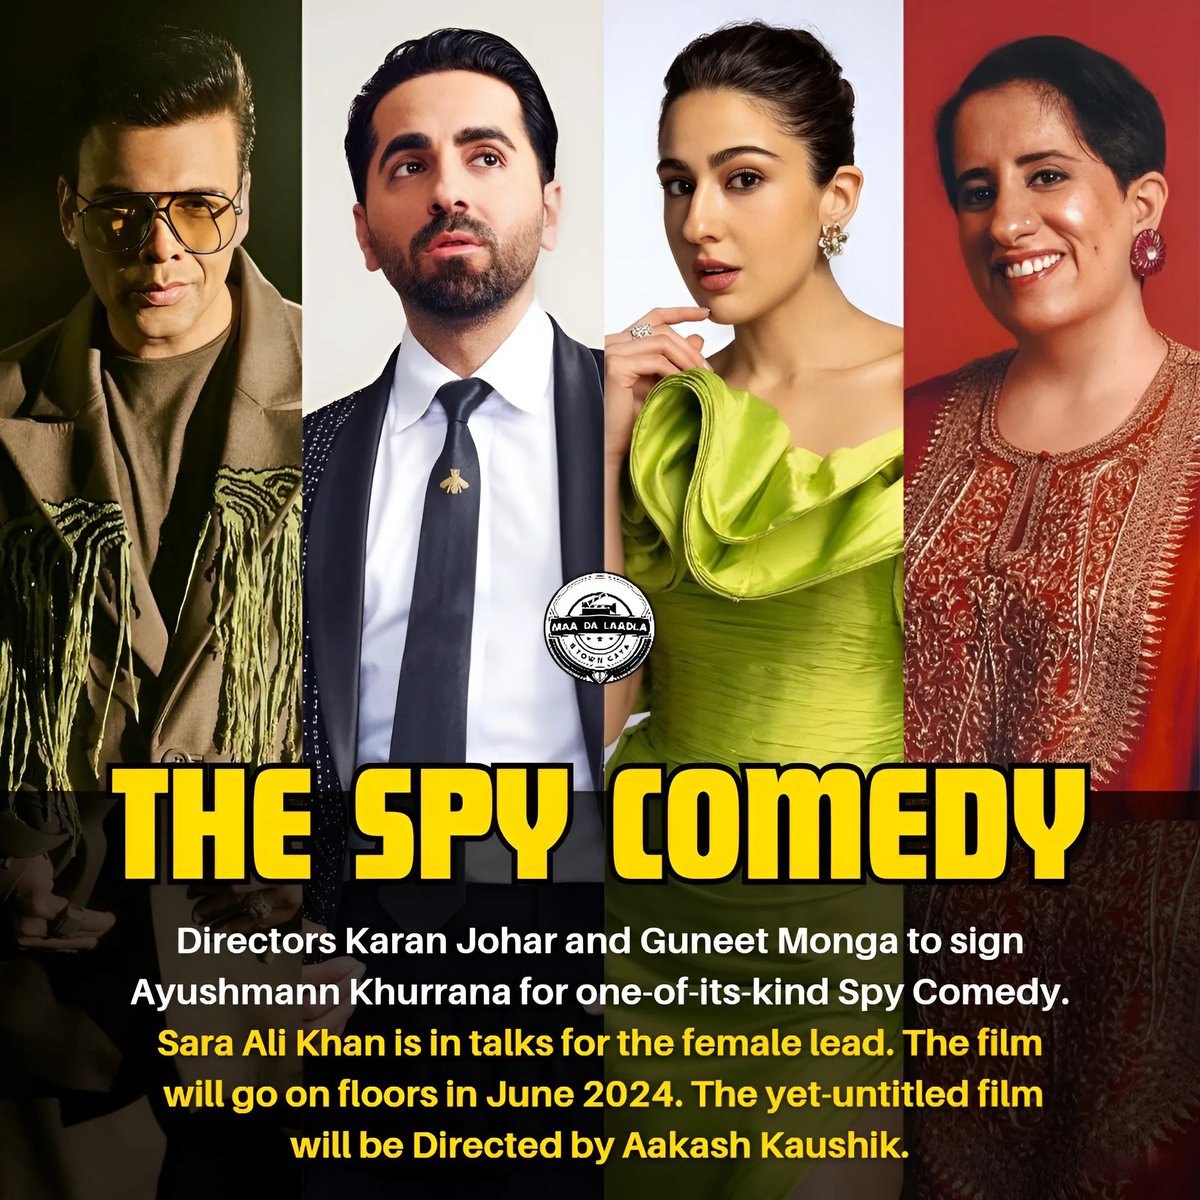 The yet-untitled film will be produced by #DharmaProductions and #SikhyaEntertainment. And will be directed by #AakashKaushik. 🕵🏻‍♂️🕵🏻‍♀️
It is touted to be a quintessential film as it breaks all the norms of the #Spyfilms made in #HindiCinema to date. 🔥🔥🔥

#KaranJohar #GuneetMonga…